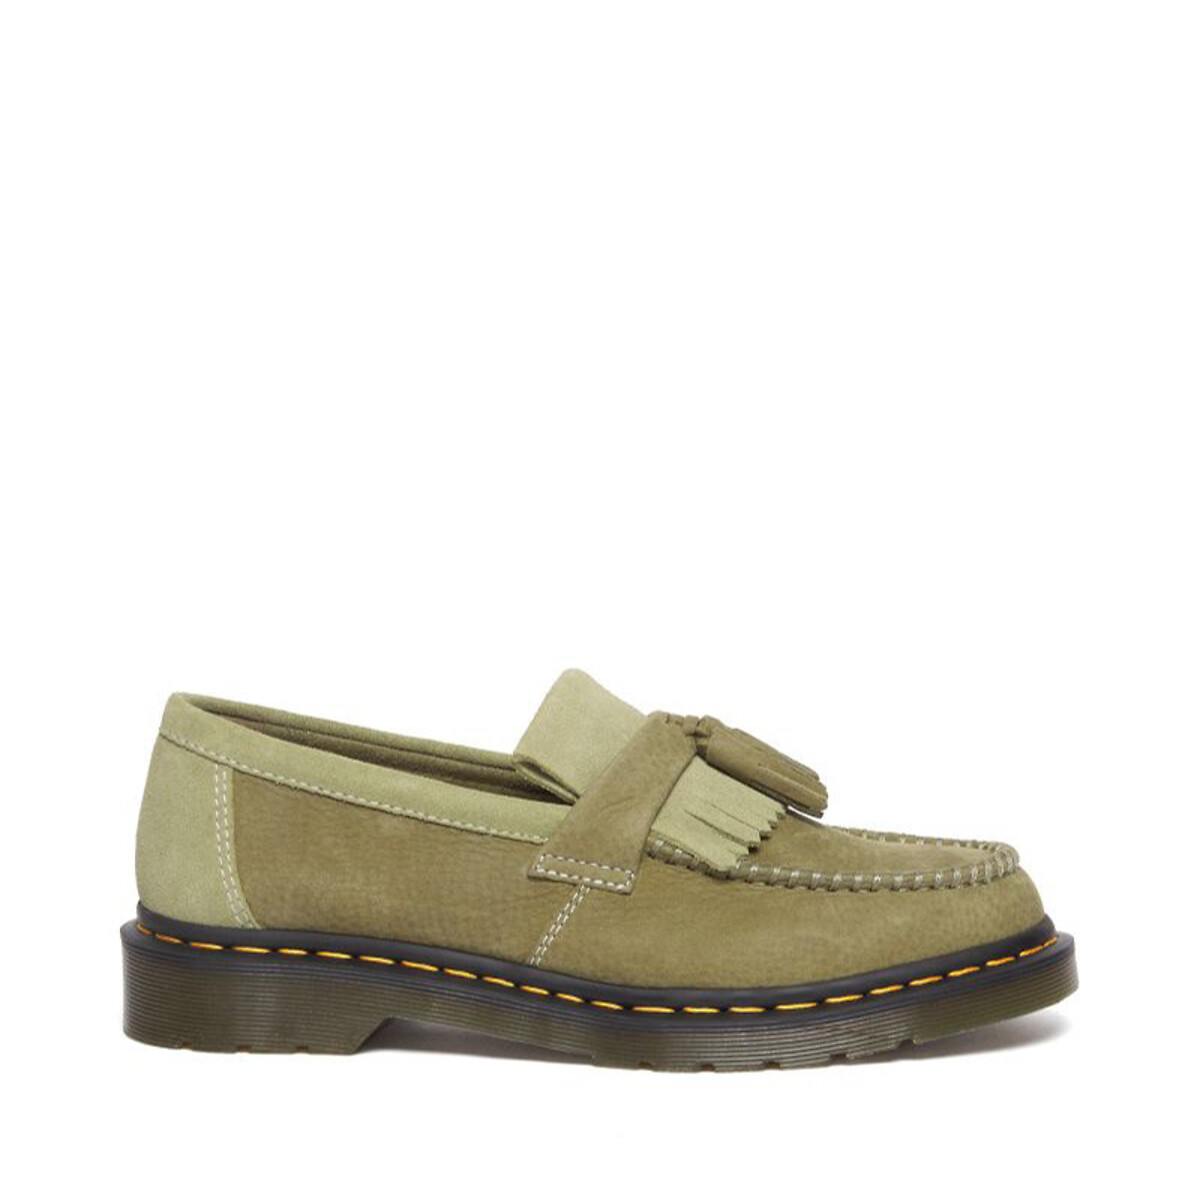 Image of Adrian Loafers in Tumbled Nubuck Leather